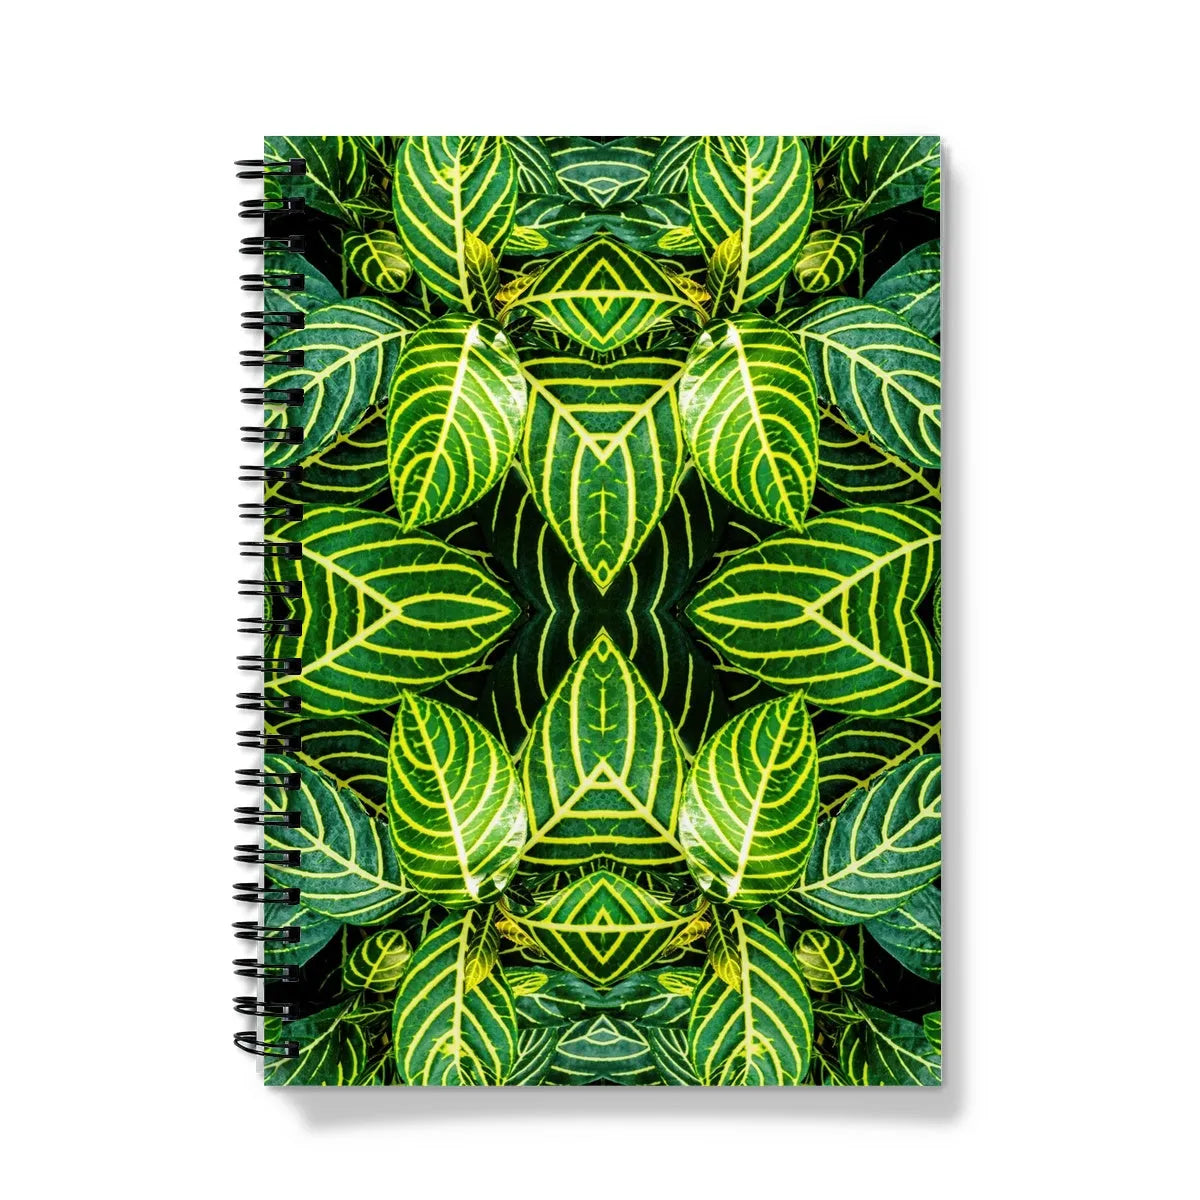 Just The Headlines Notebook - Trippy Leaf Art - A5 - Graph Paper - Notebooks & Notepads - Aesthetic Art